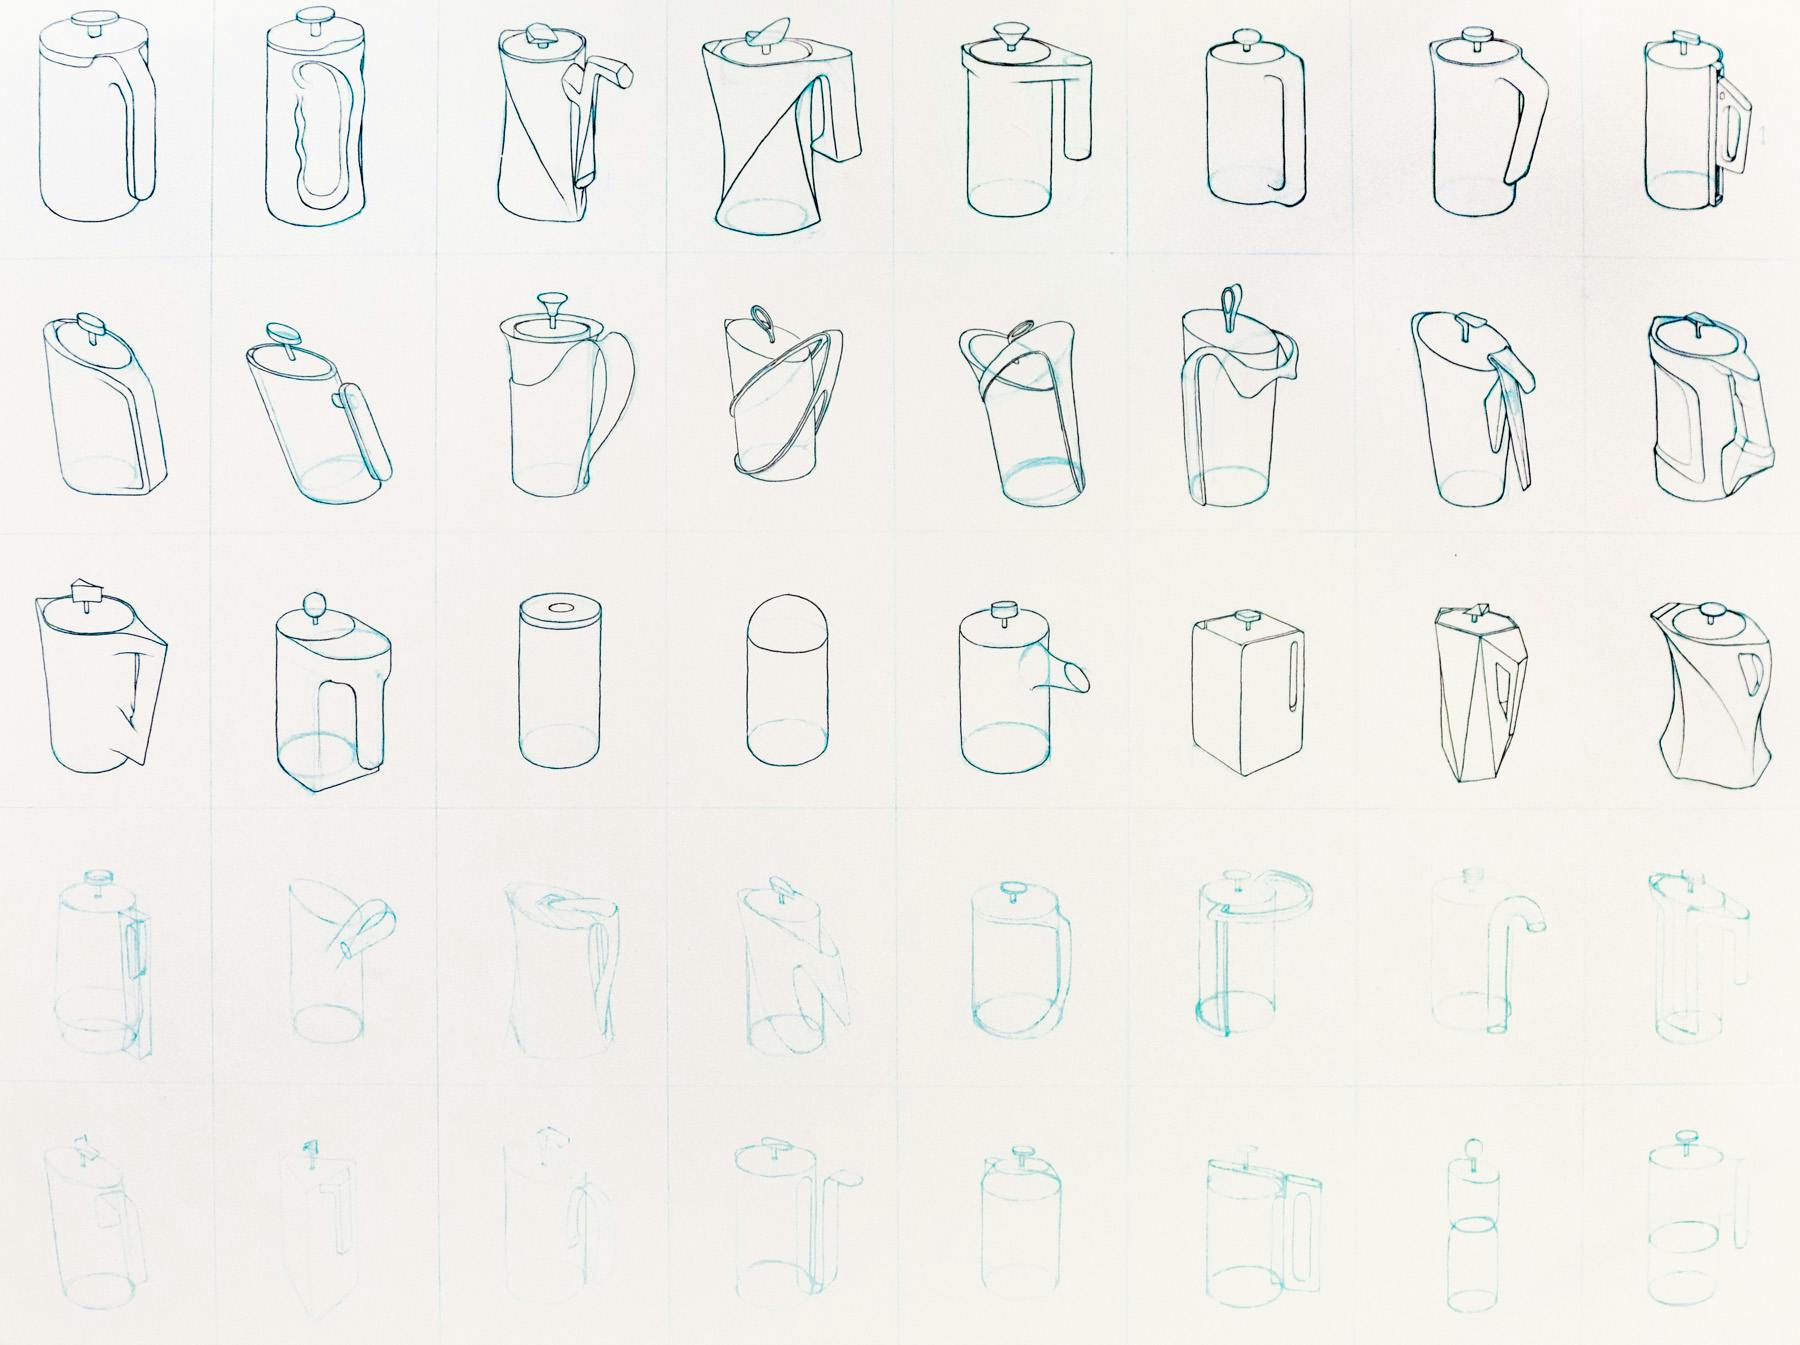 40 thumbnail sketches of possible french press forms. These range from rather minimal cylinders to eccentric sculptural forms.